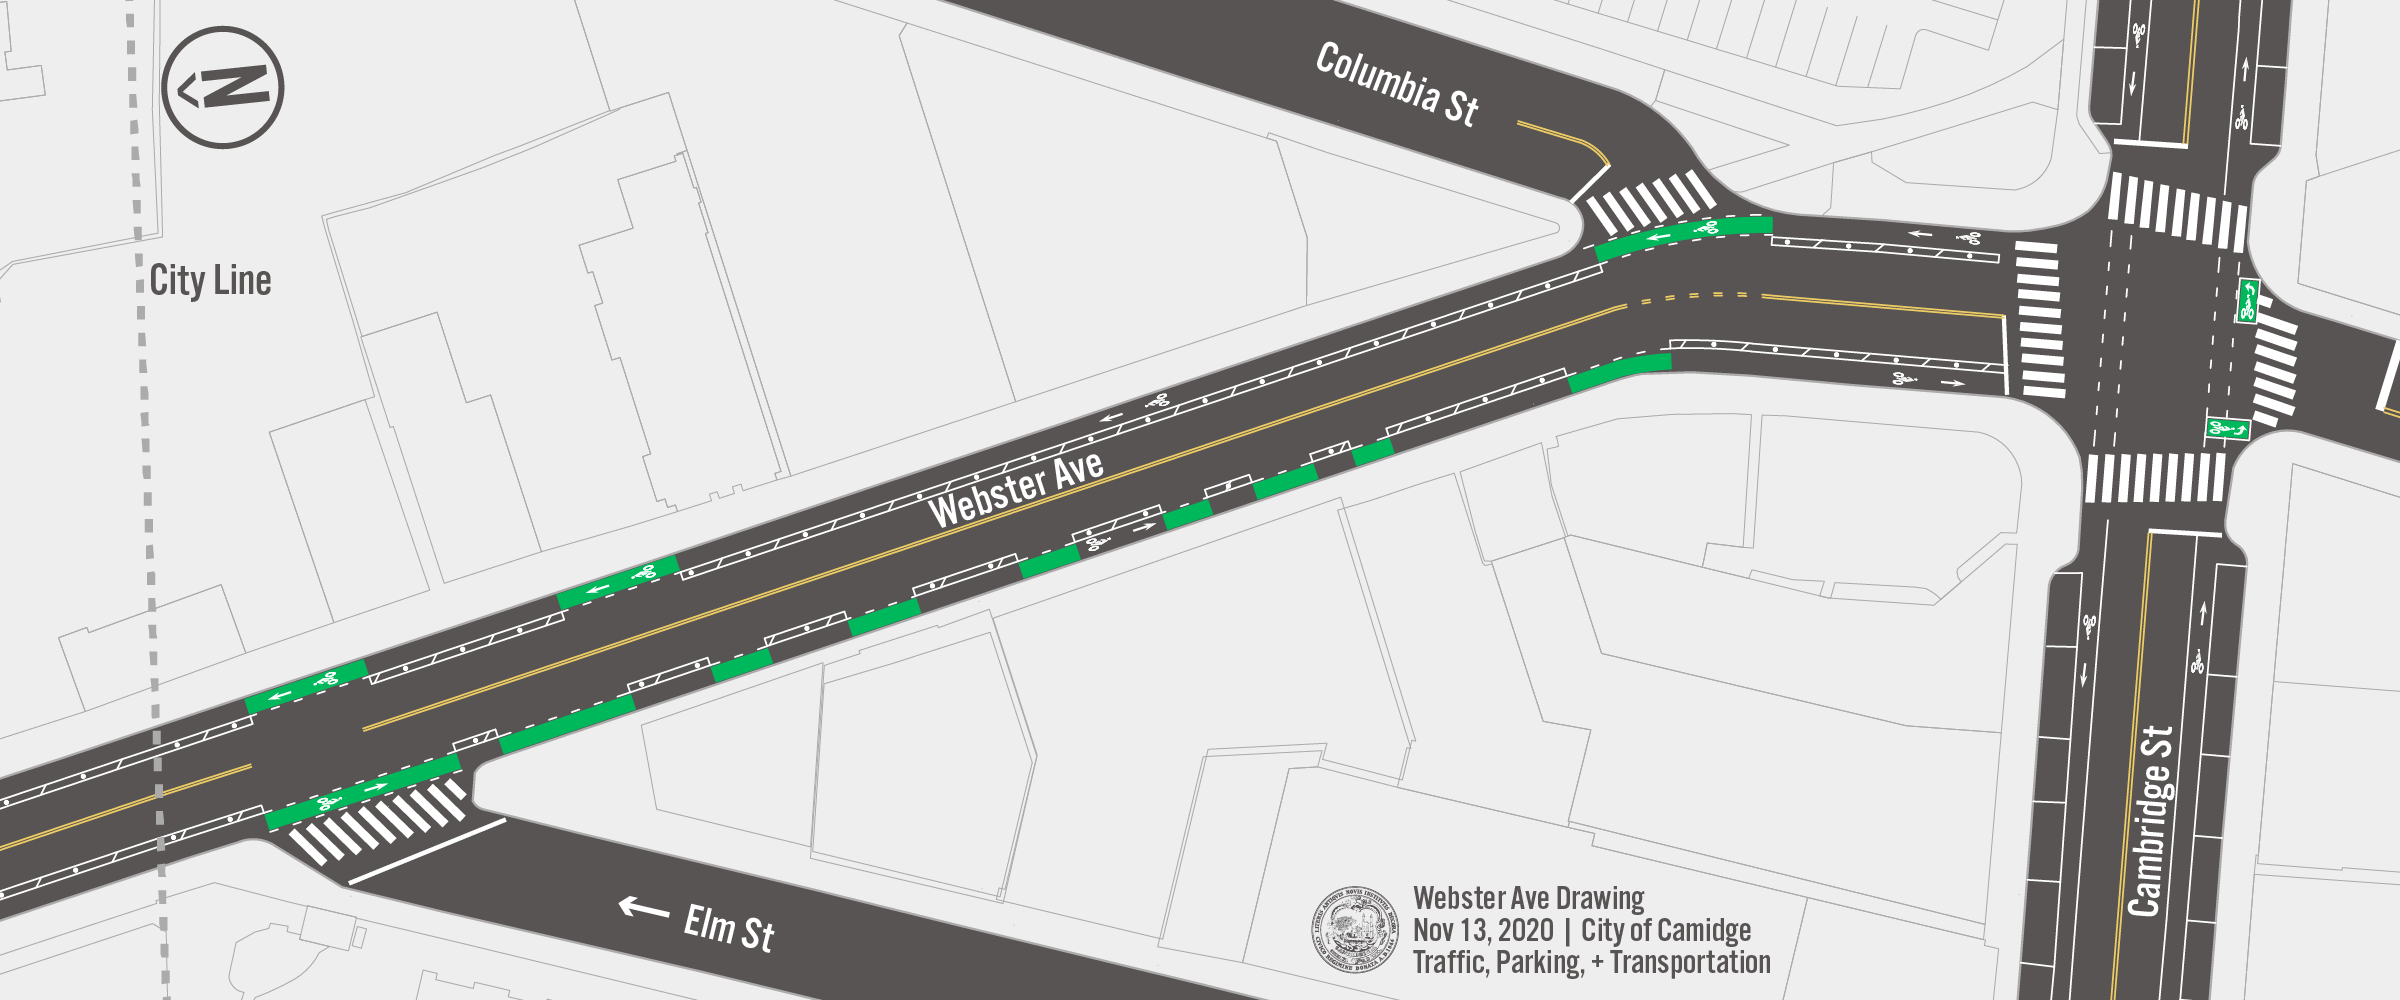 A plan view drawing showing the pavement markings that will be installed on Webster Ave.